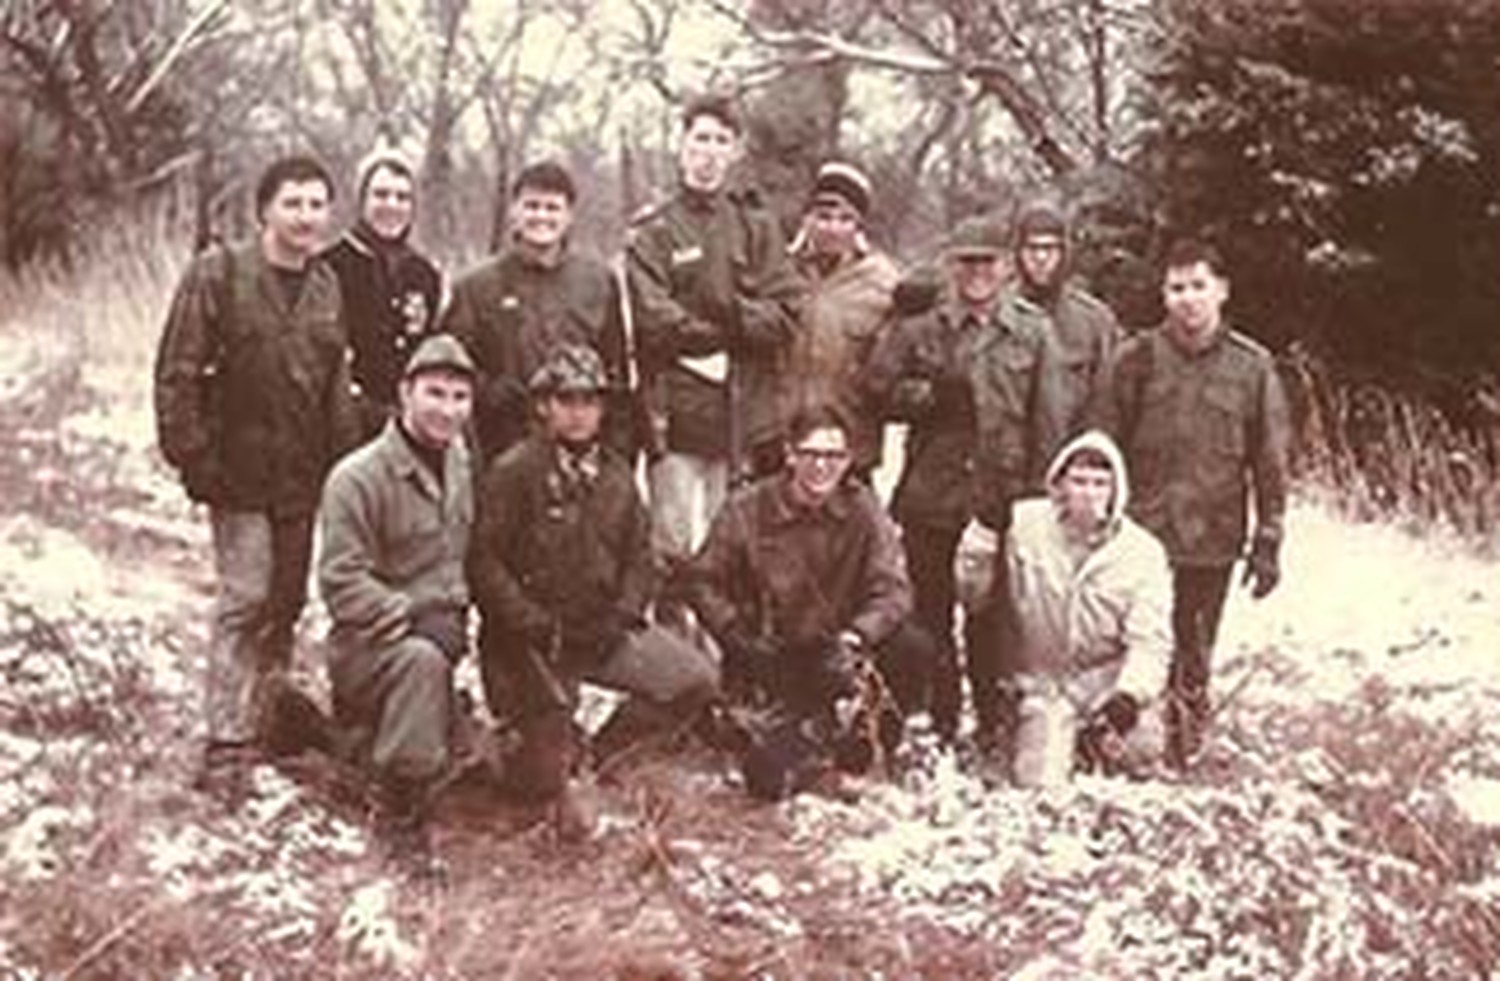 Army-ROTC-field-exercise-1970-2.jpg